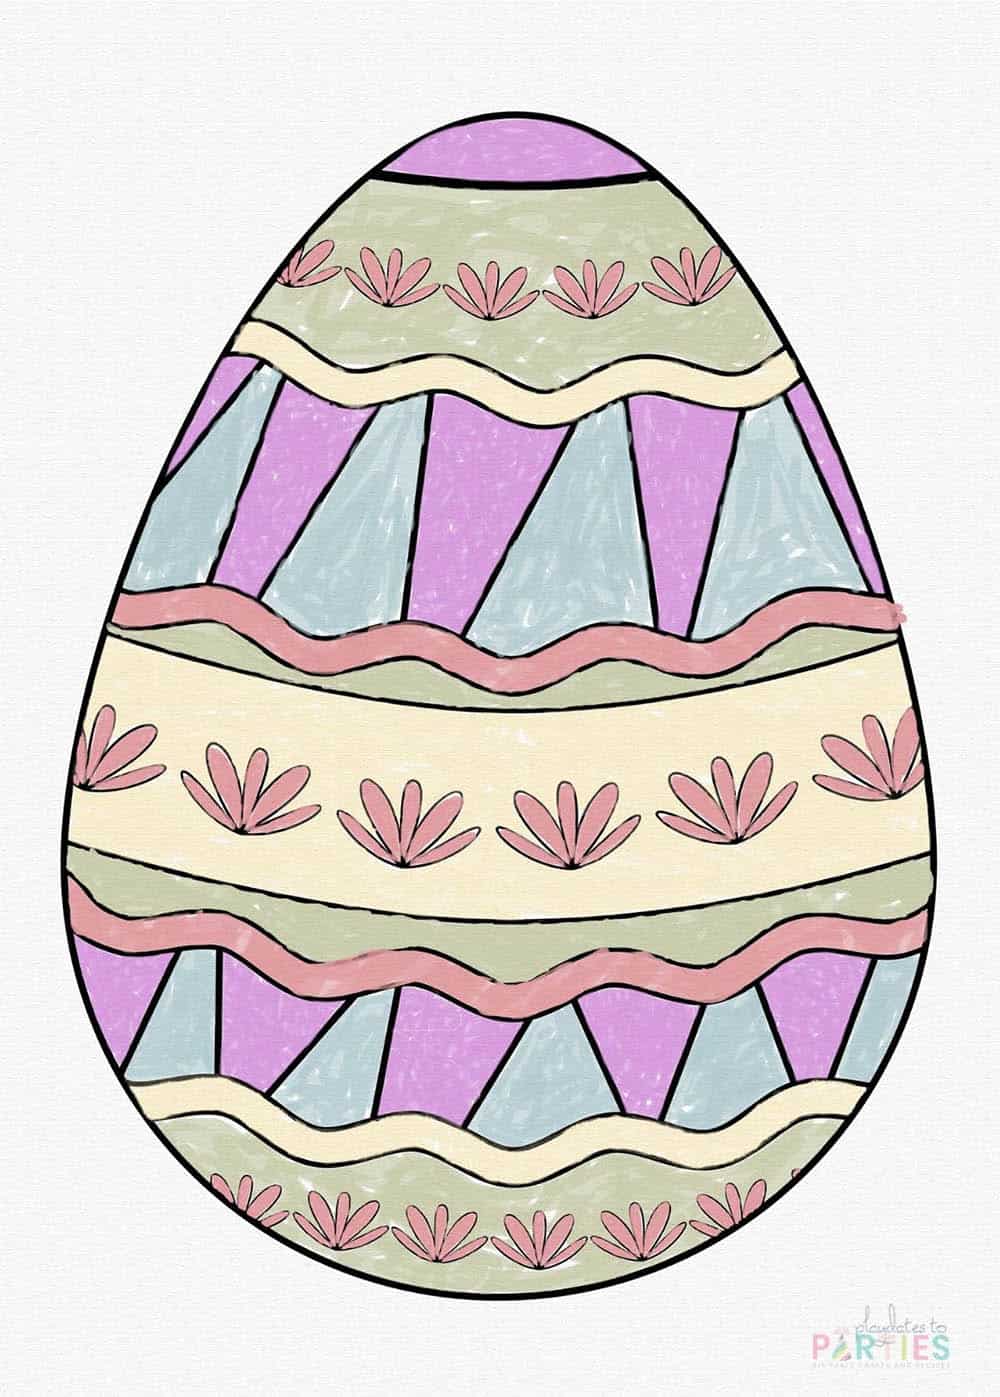 Finished coloring page of an Easter egg with stripes and flowers.